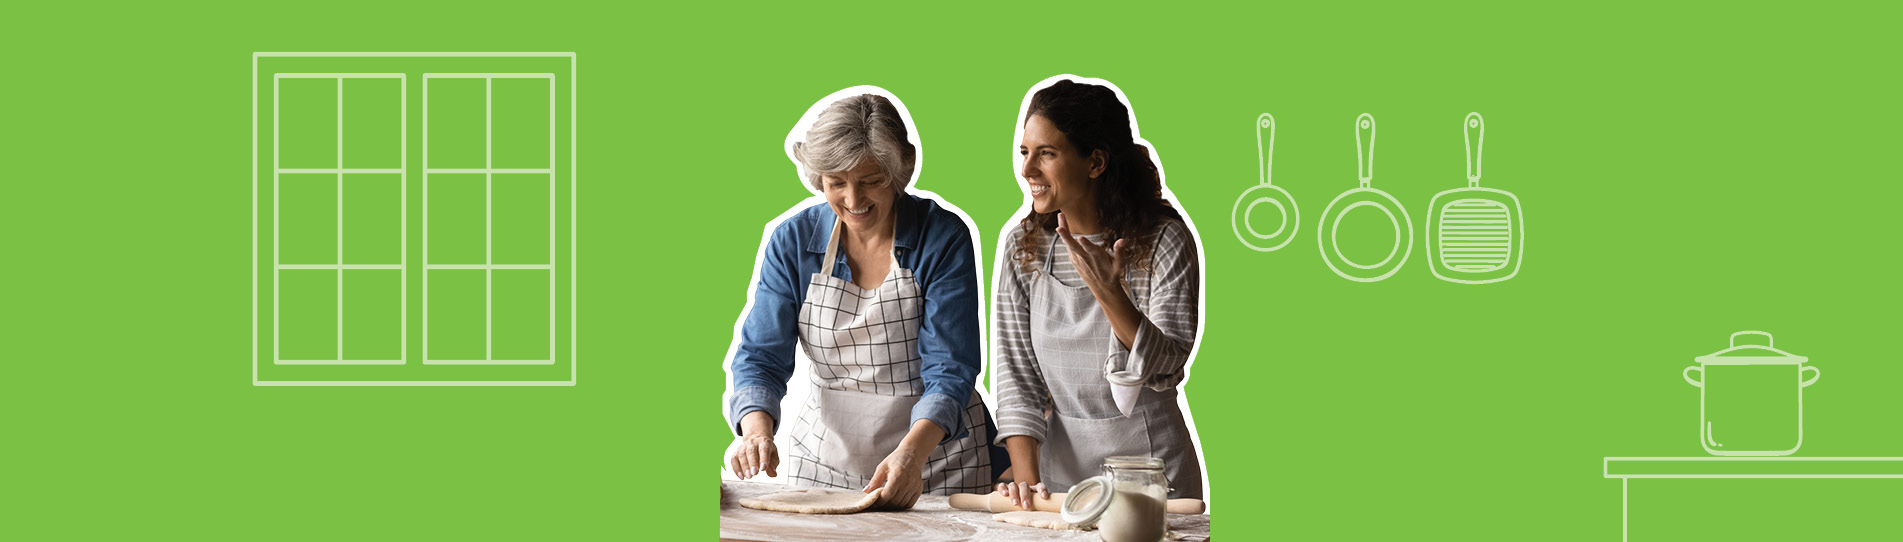 two women baking and smiling